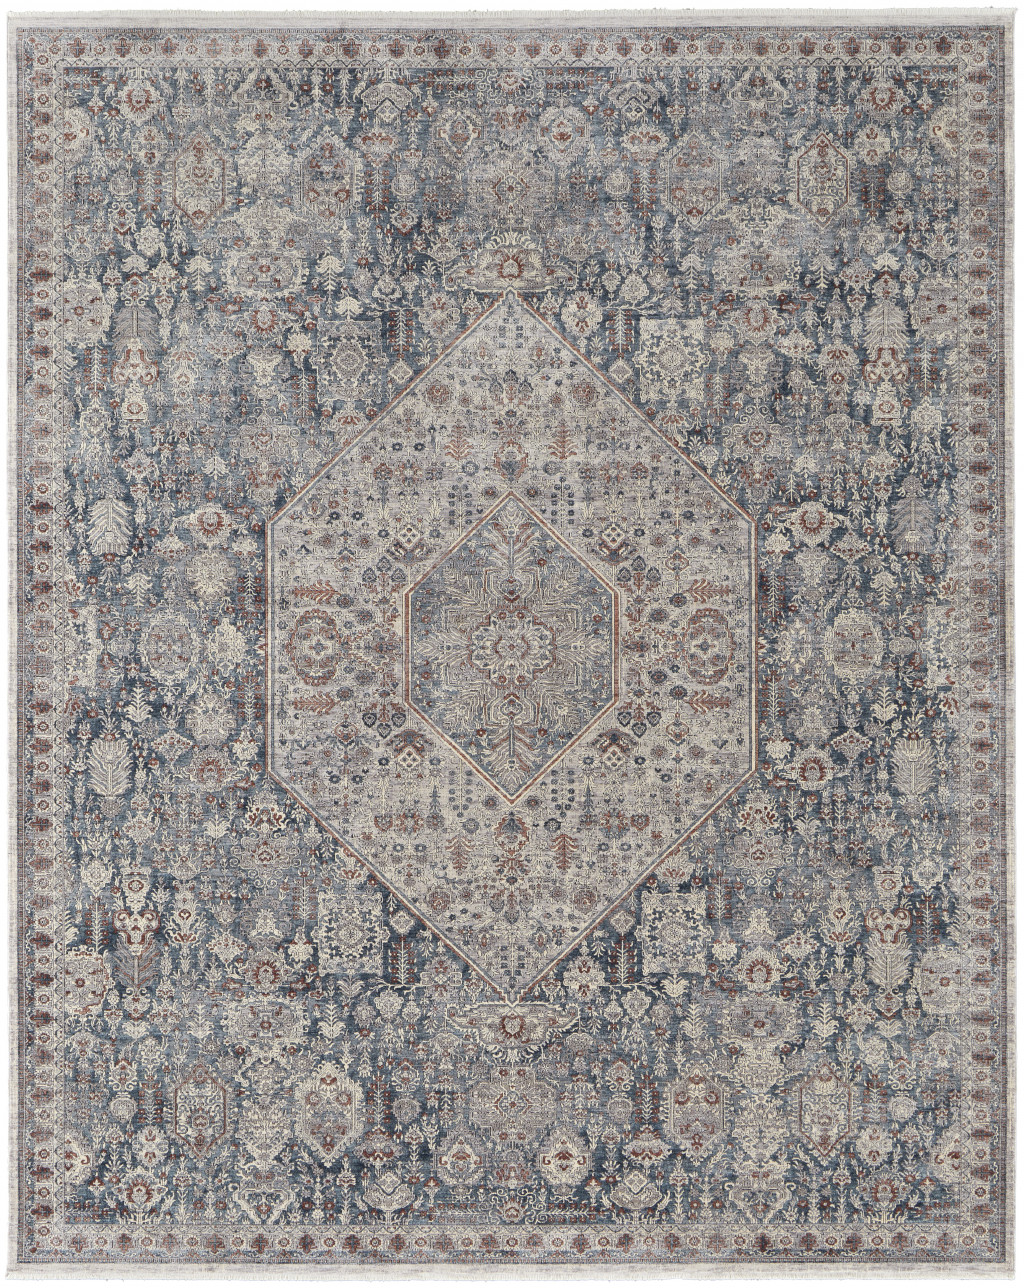 8' X 10' Blue And Ivory Floral Power Loom Stain Resistant Area Rug-514476-1